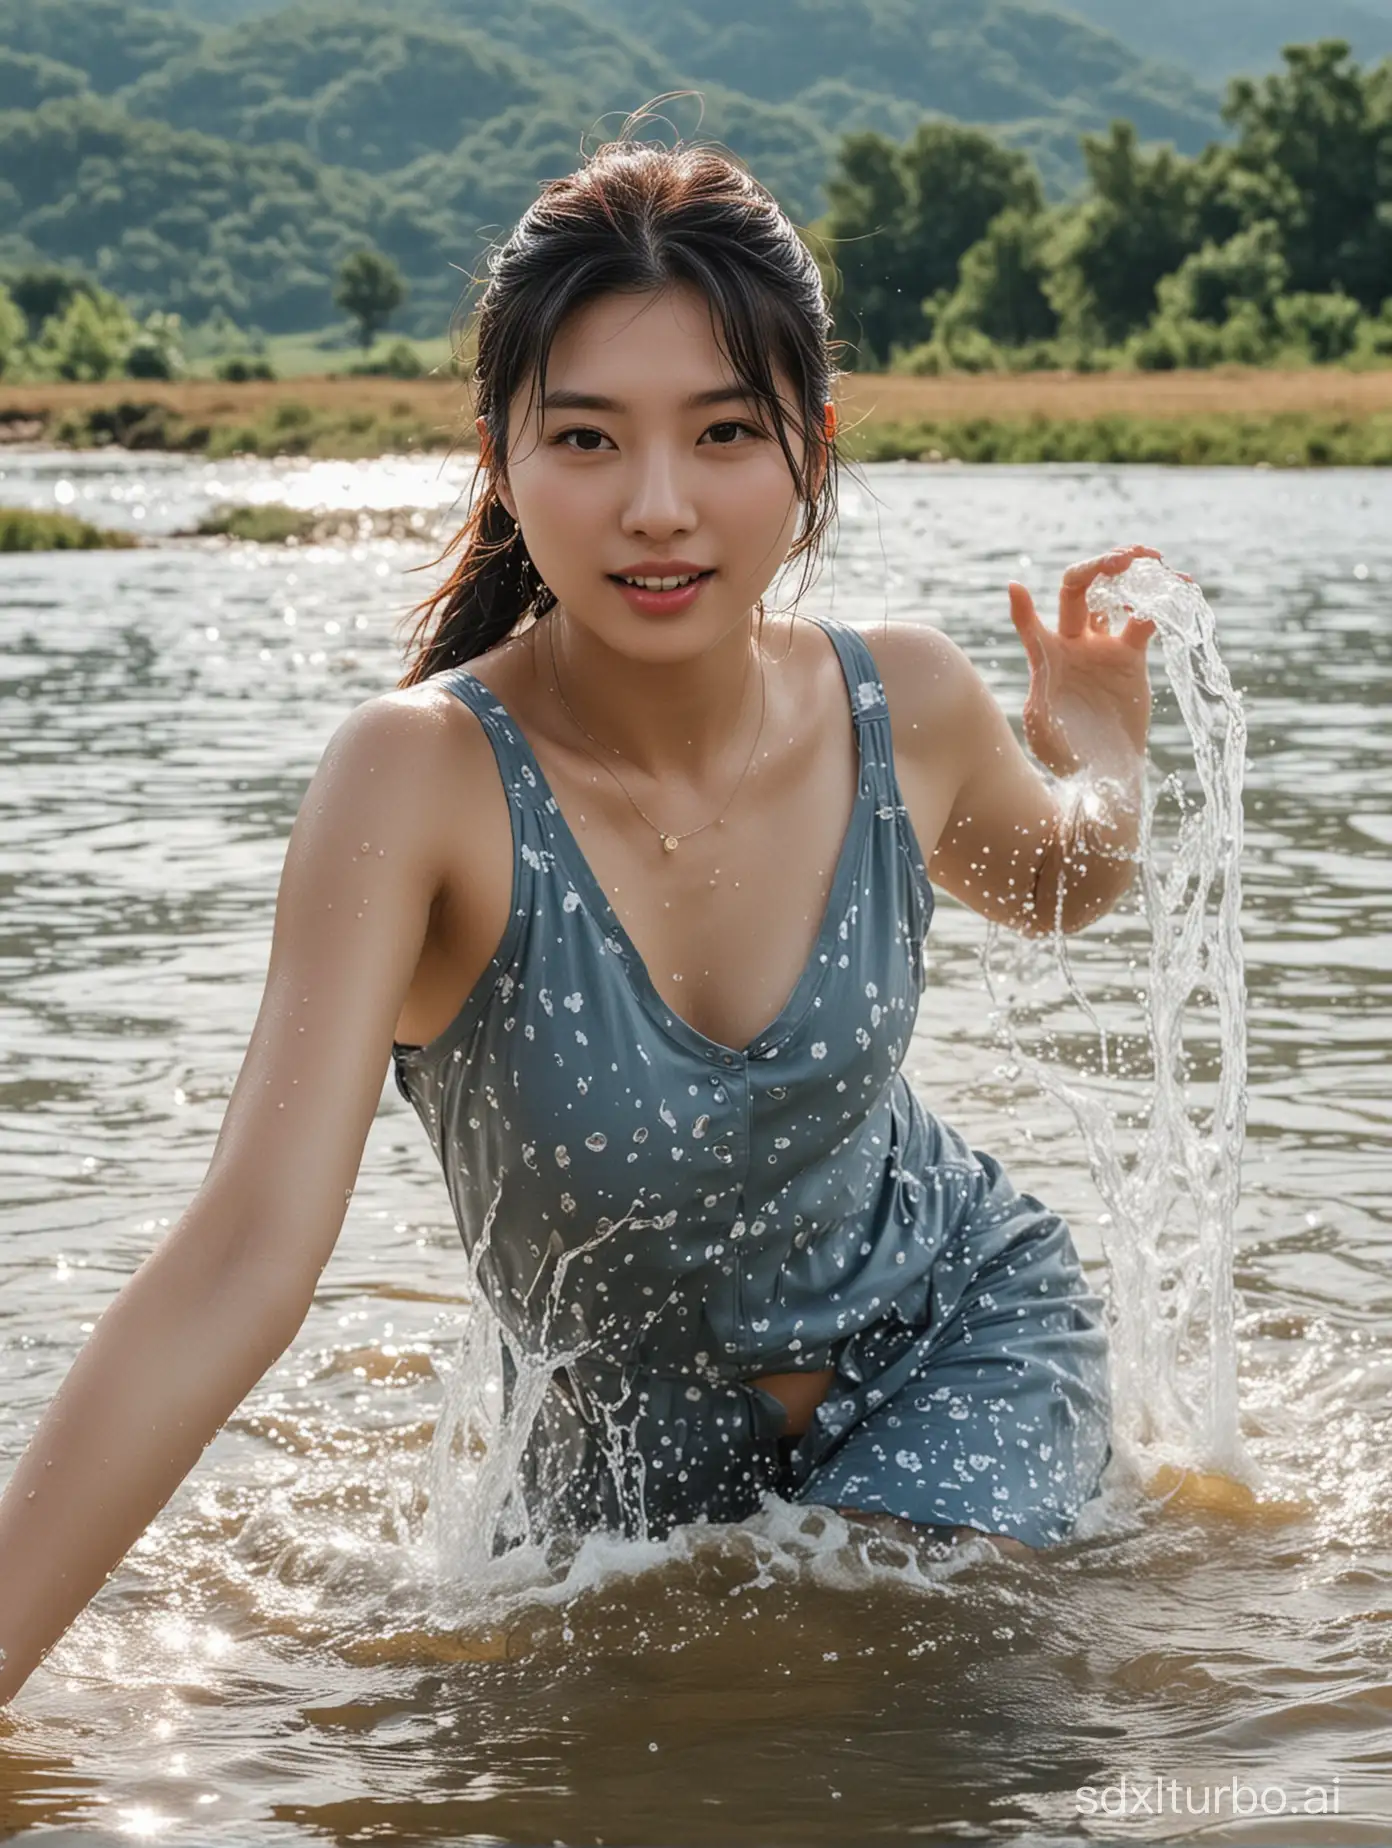 SUZY BAE PLAYING IN WATER, NATURE, RURAL